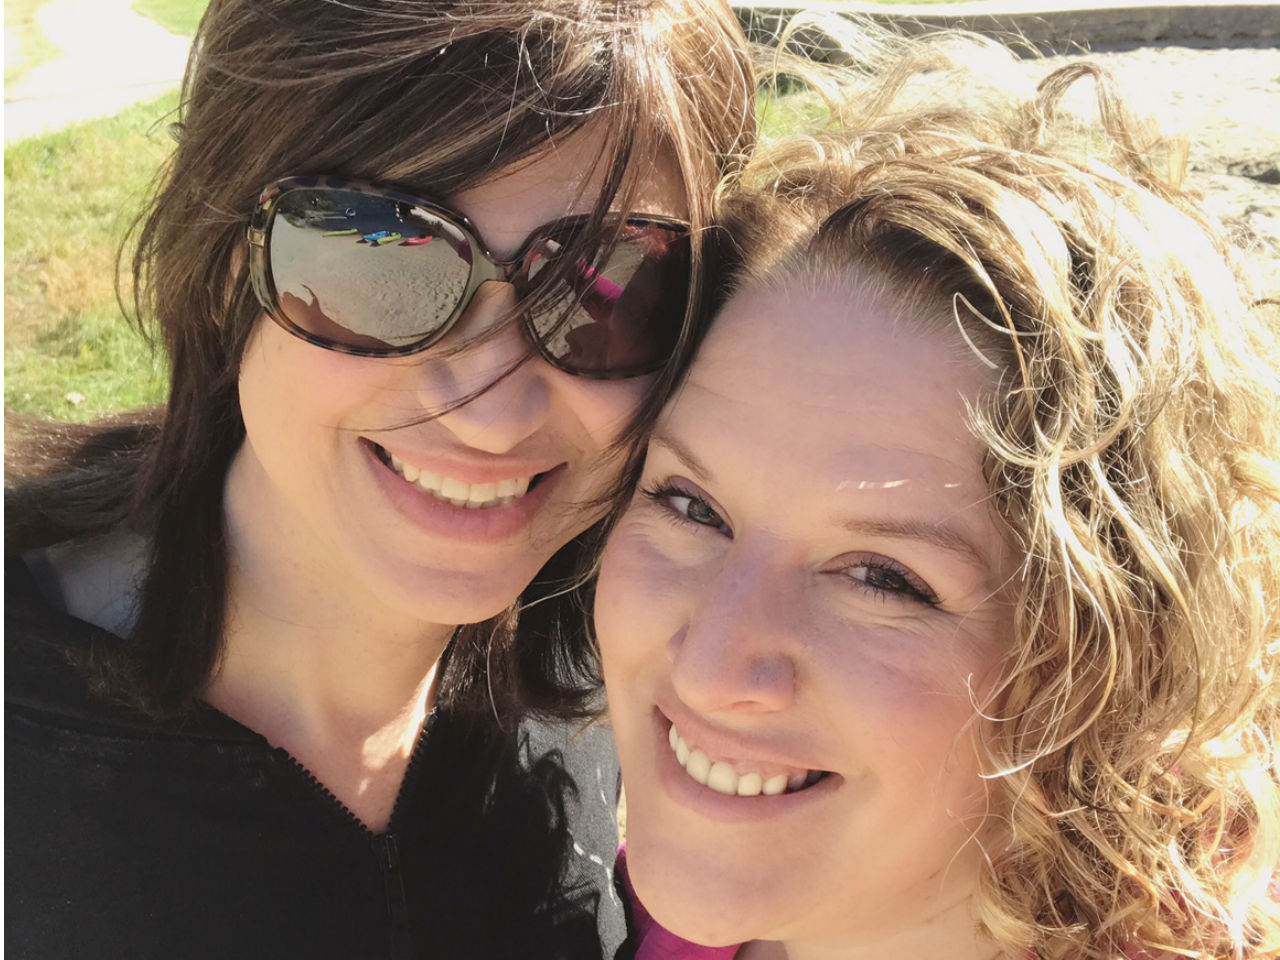 trans daughter-Zoe and Amanda pose for a selfie while on vacation.